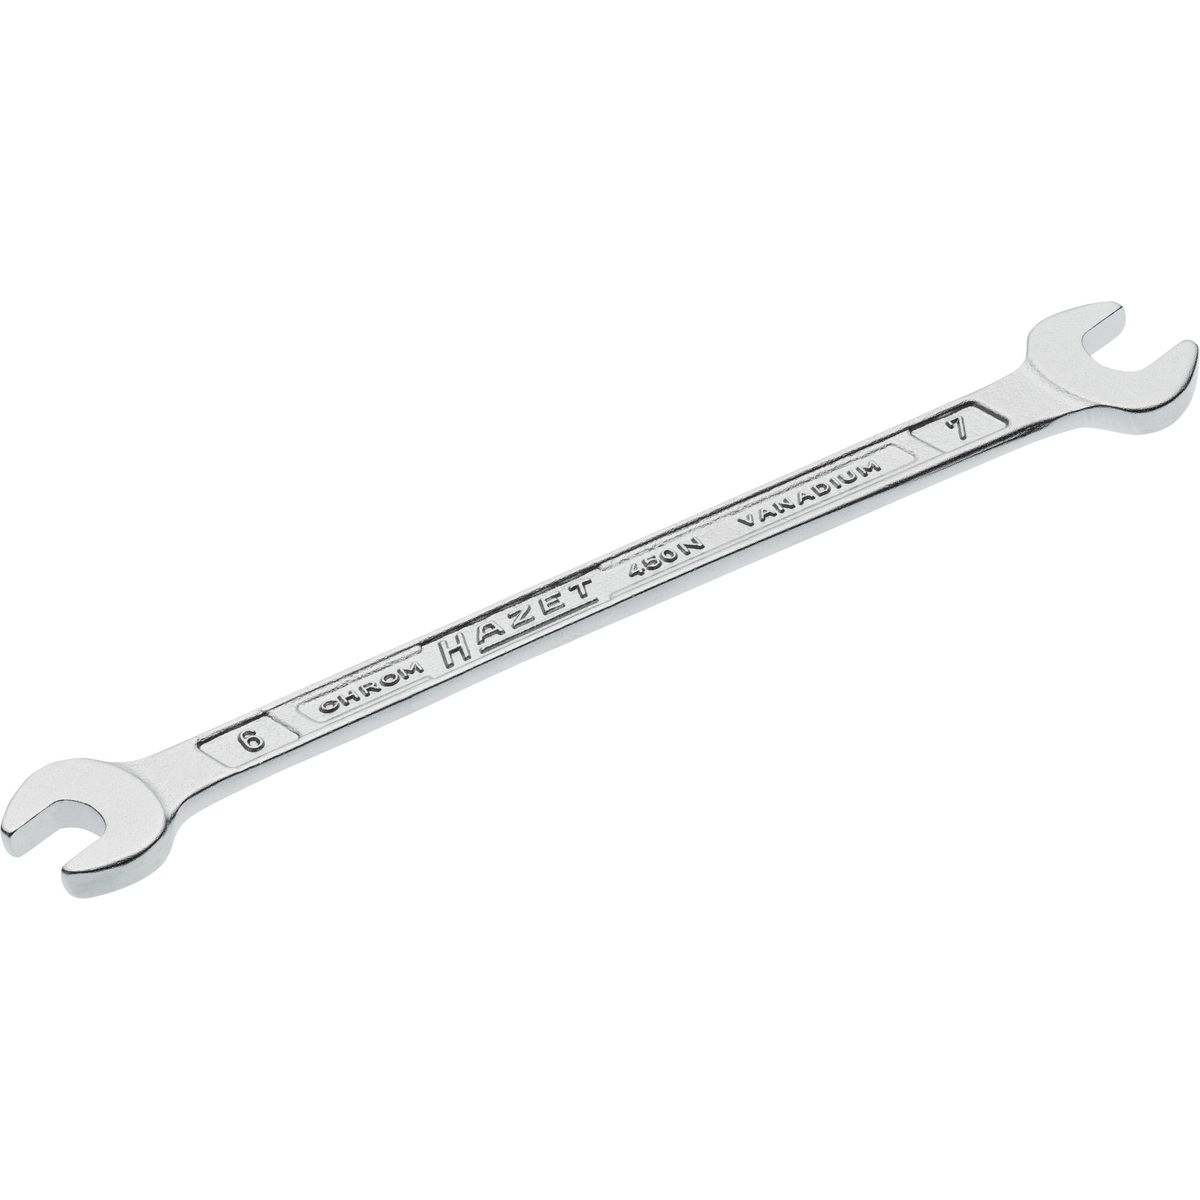 Double Open-End Wrench No.450N-6x7 Hazet®